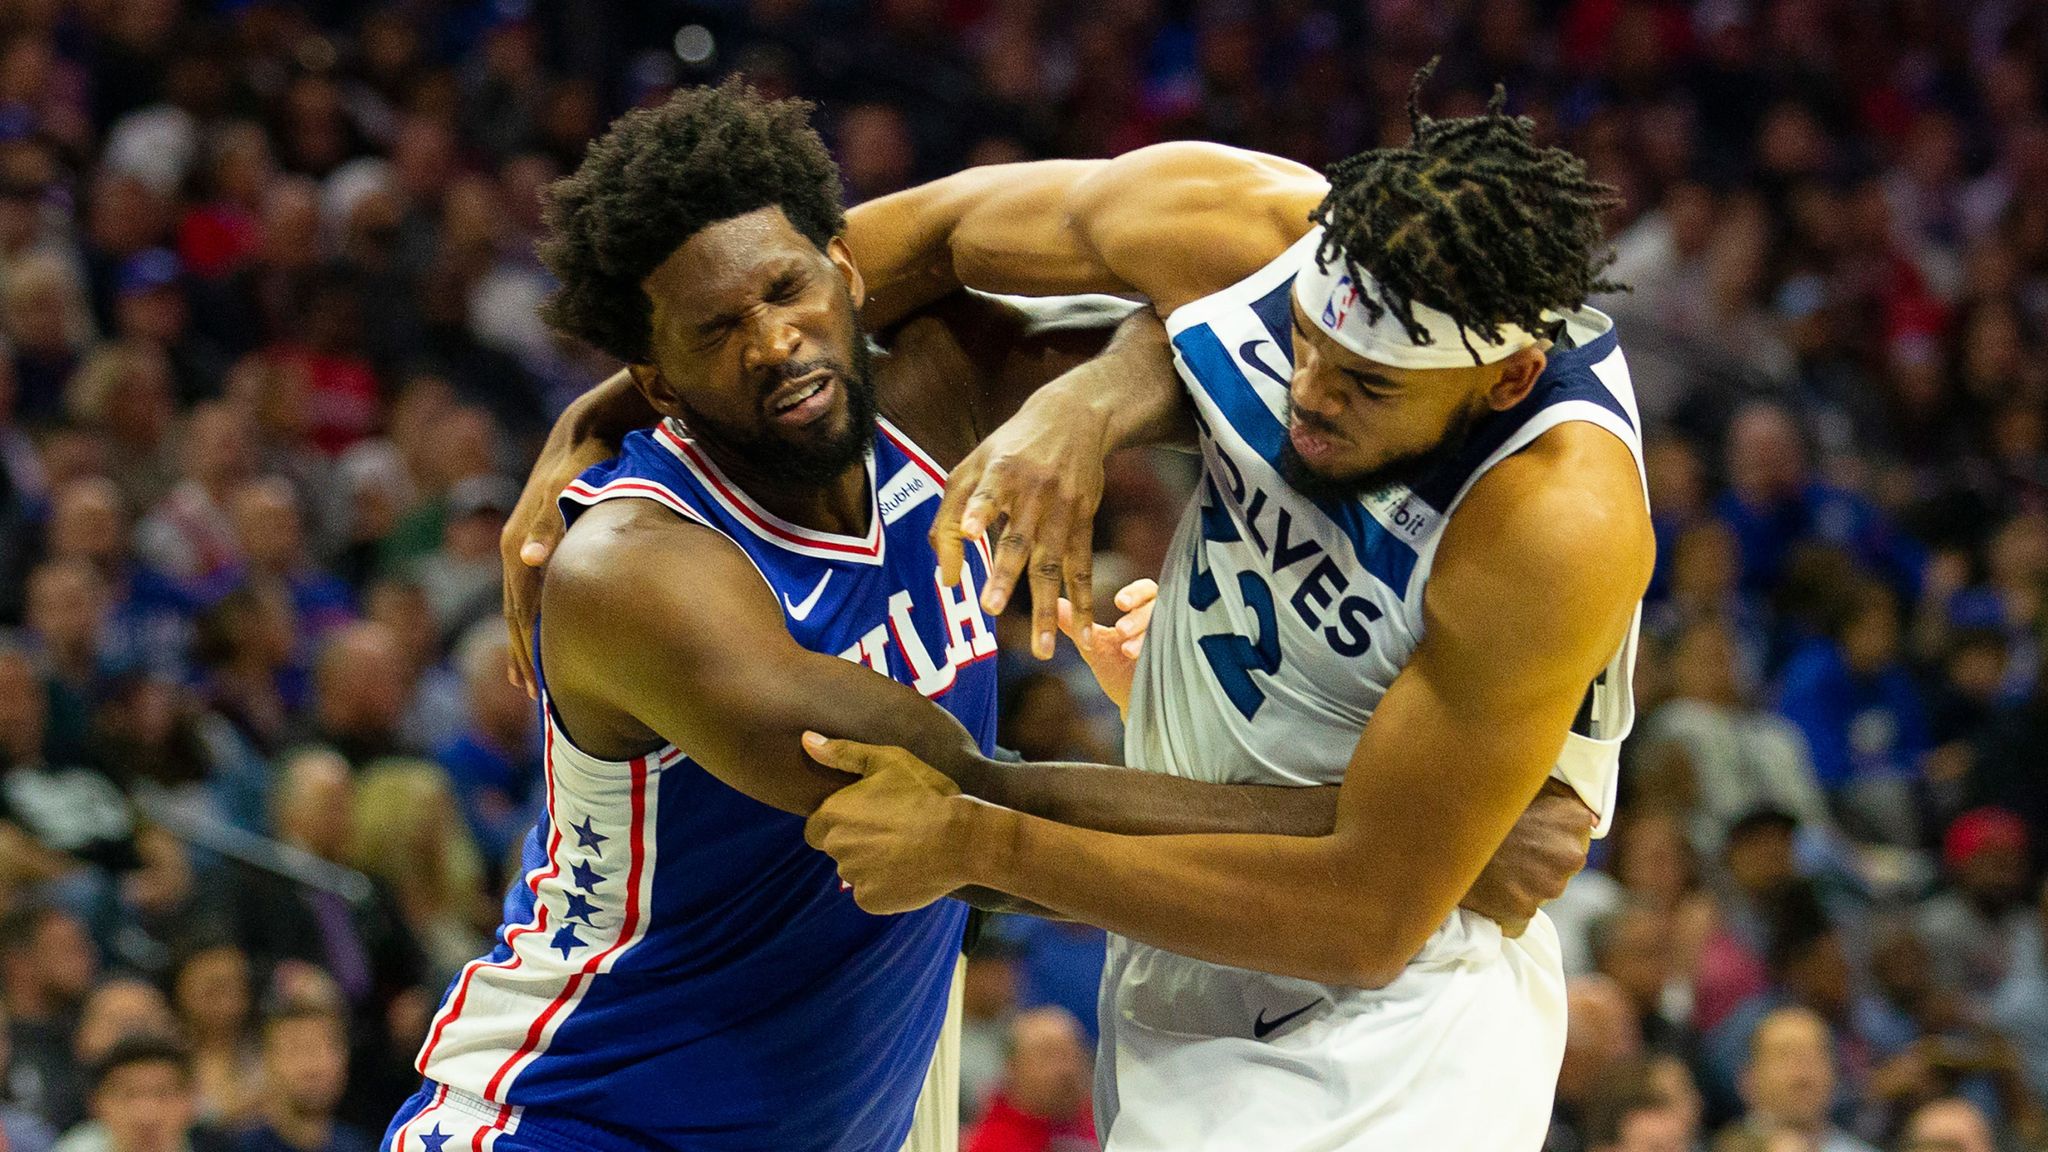 Flipboard: Joel Embiid and Karl-Anthony Towns ejected as 76ers beat Timberwolves2048 x 1152